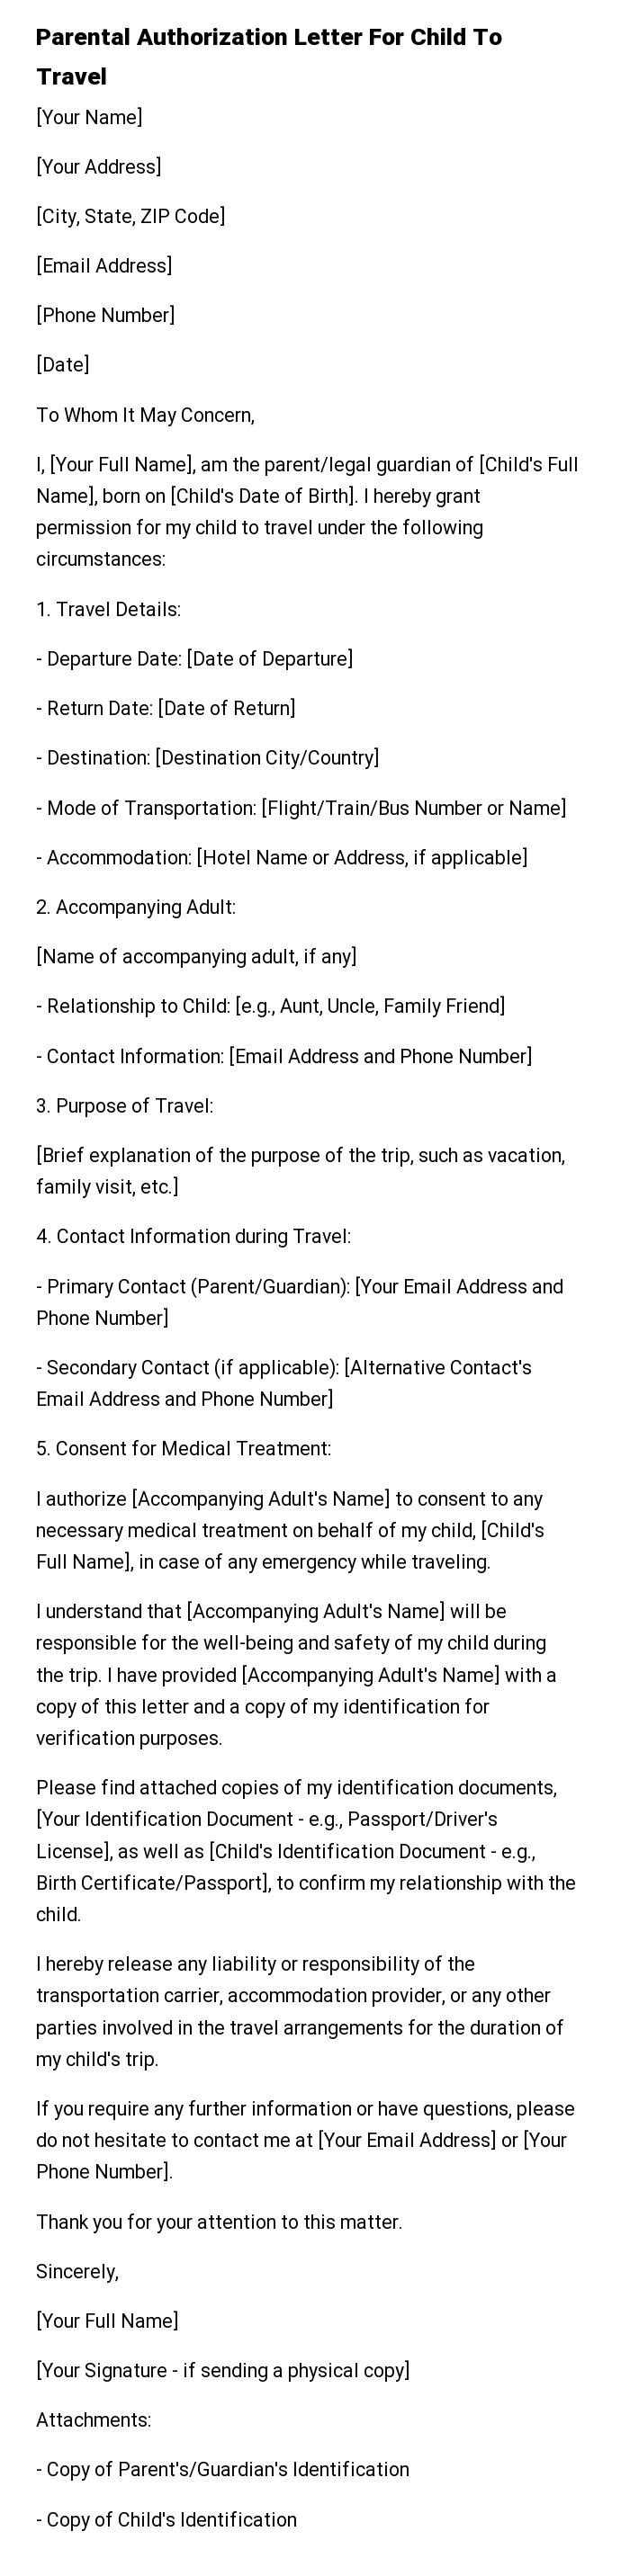 Parental Authorization Letter For Child To Travel